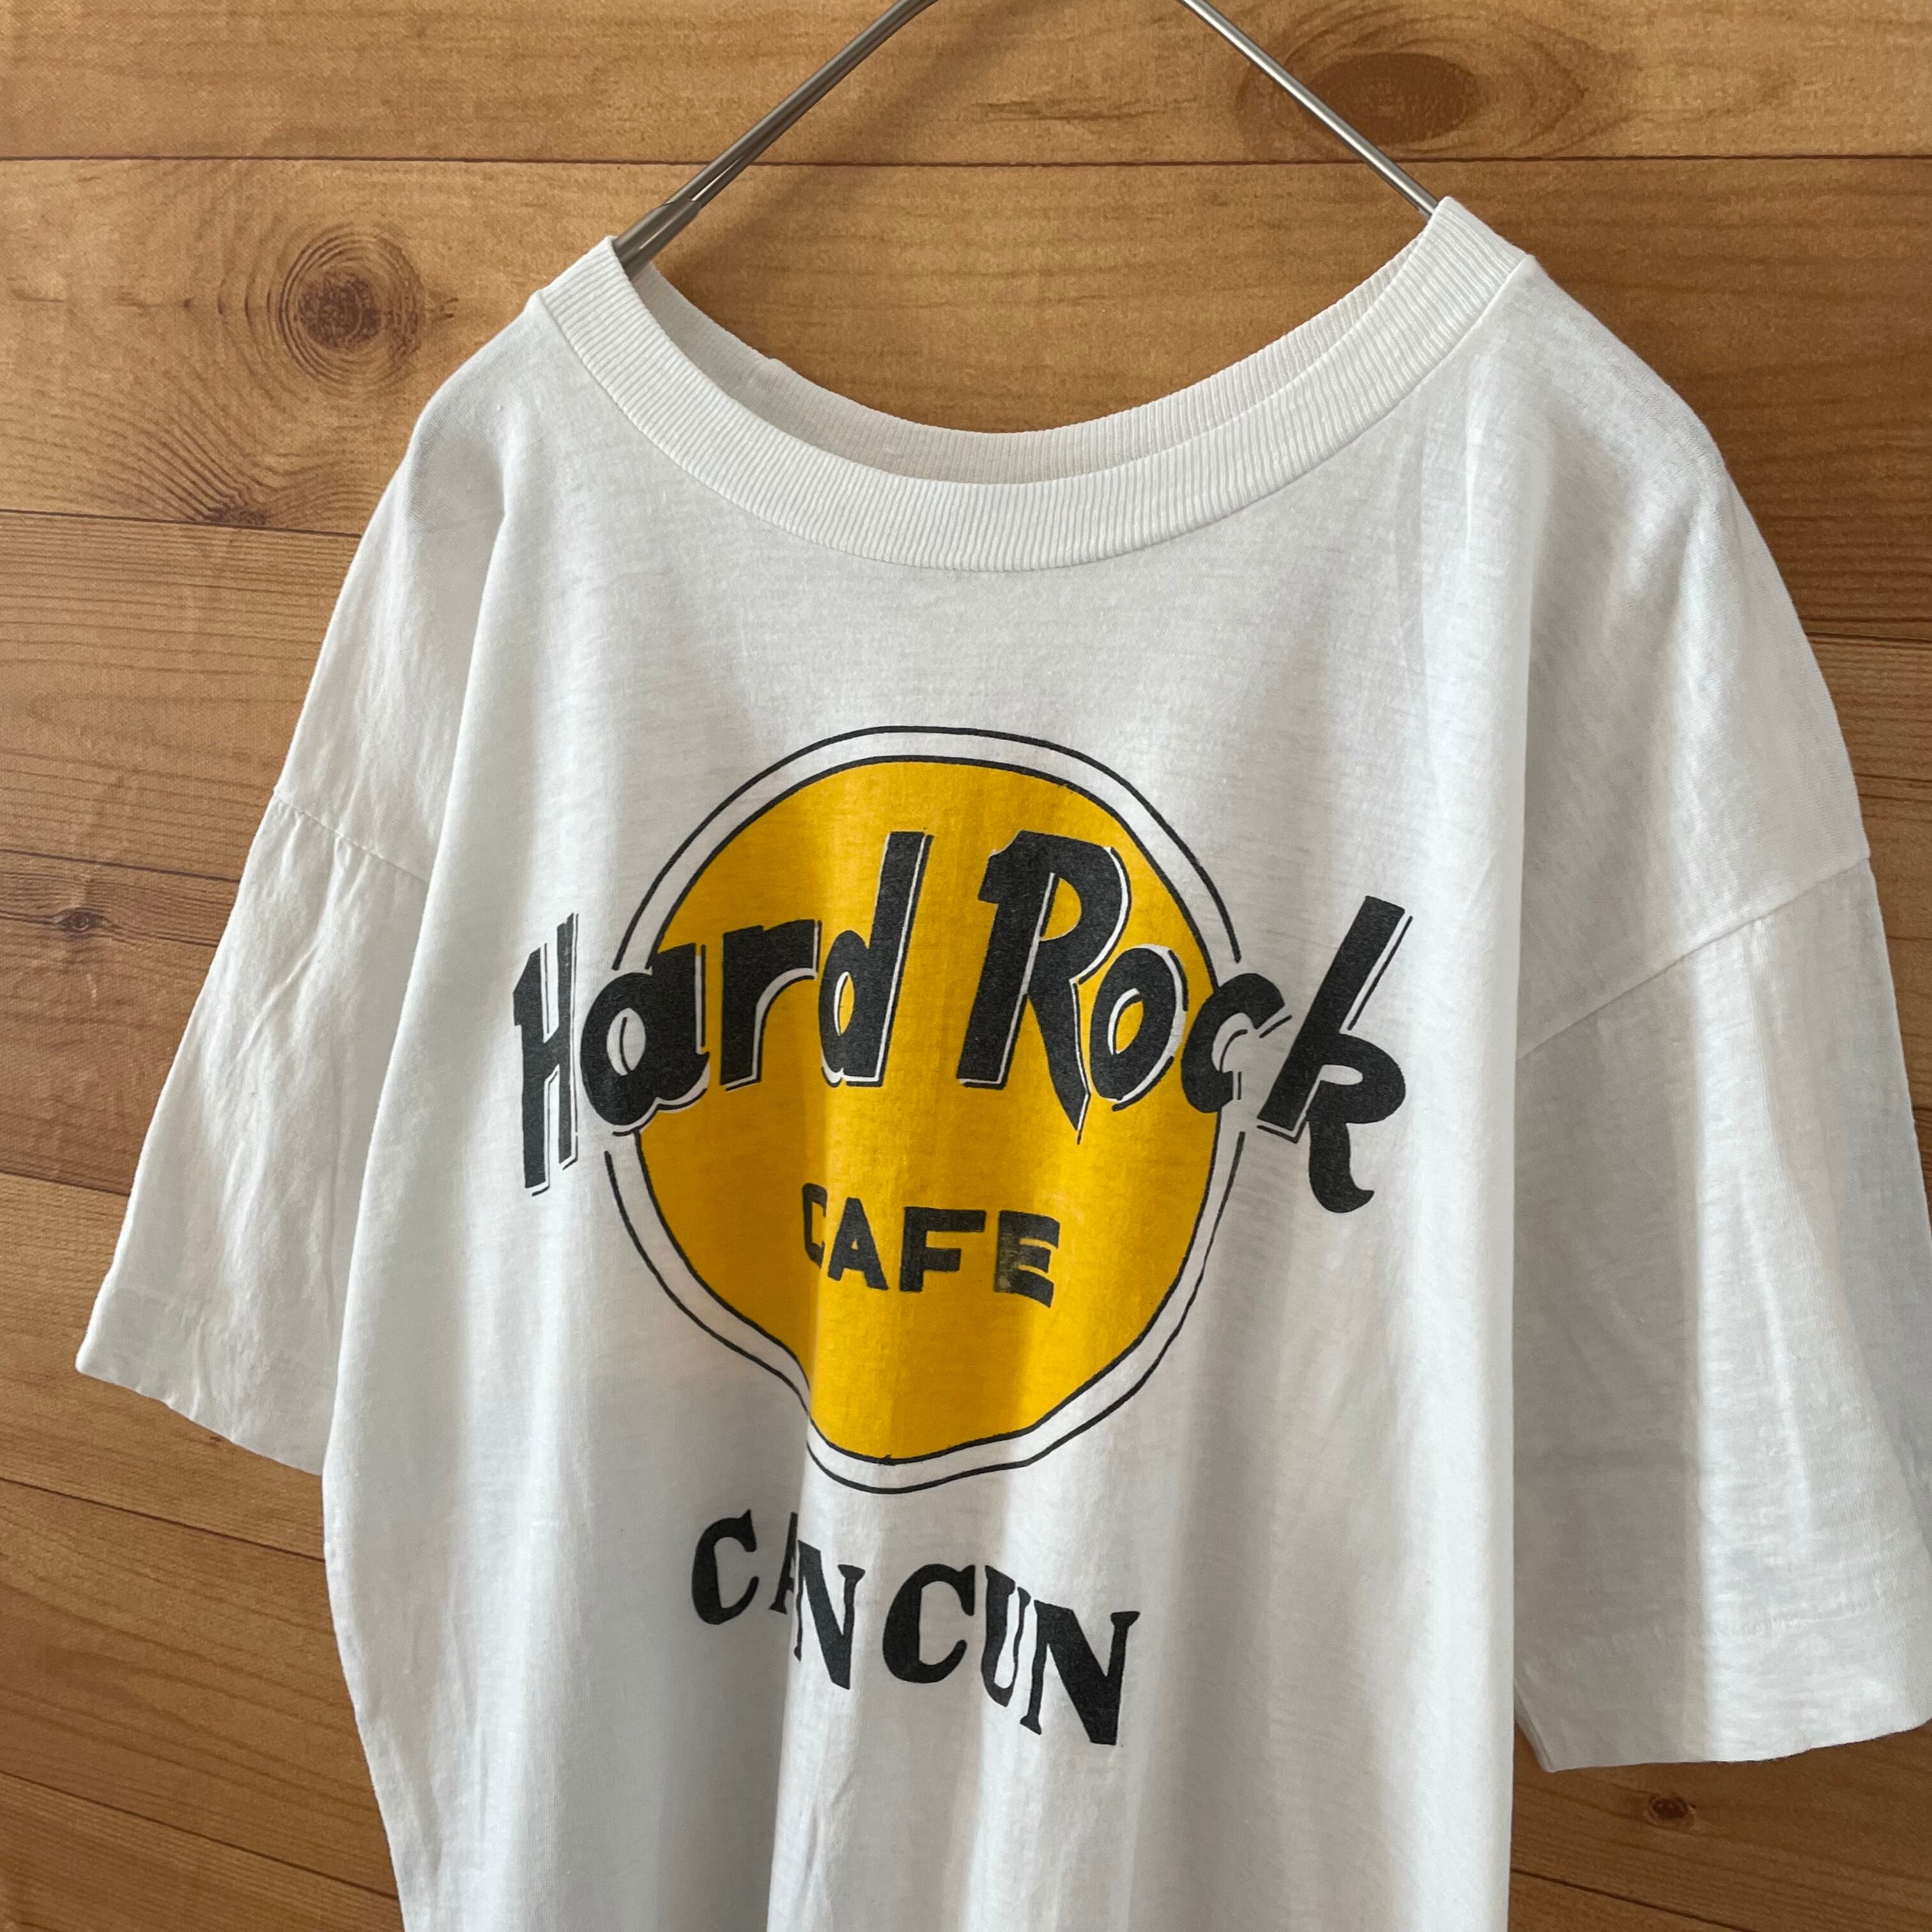 【Silver Fox】90s ハードロックカフェ ロゴ Tシャツ hardrock cafe cancun シングルステッチ Lサイズ US古着 |  古着屋手ぶらがbest powered by BASE